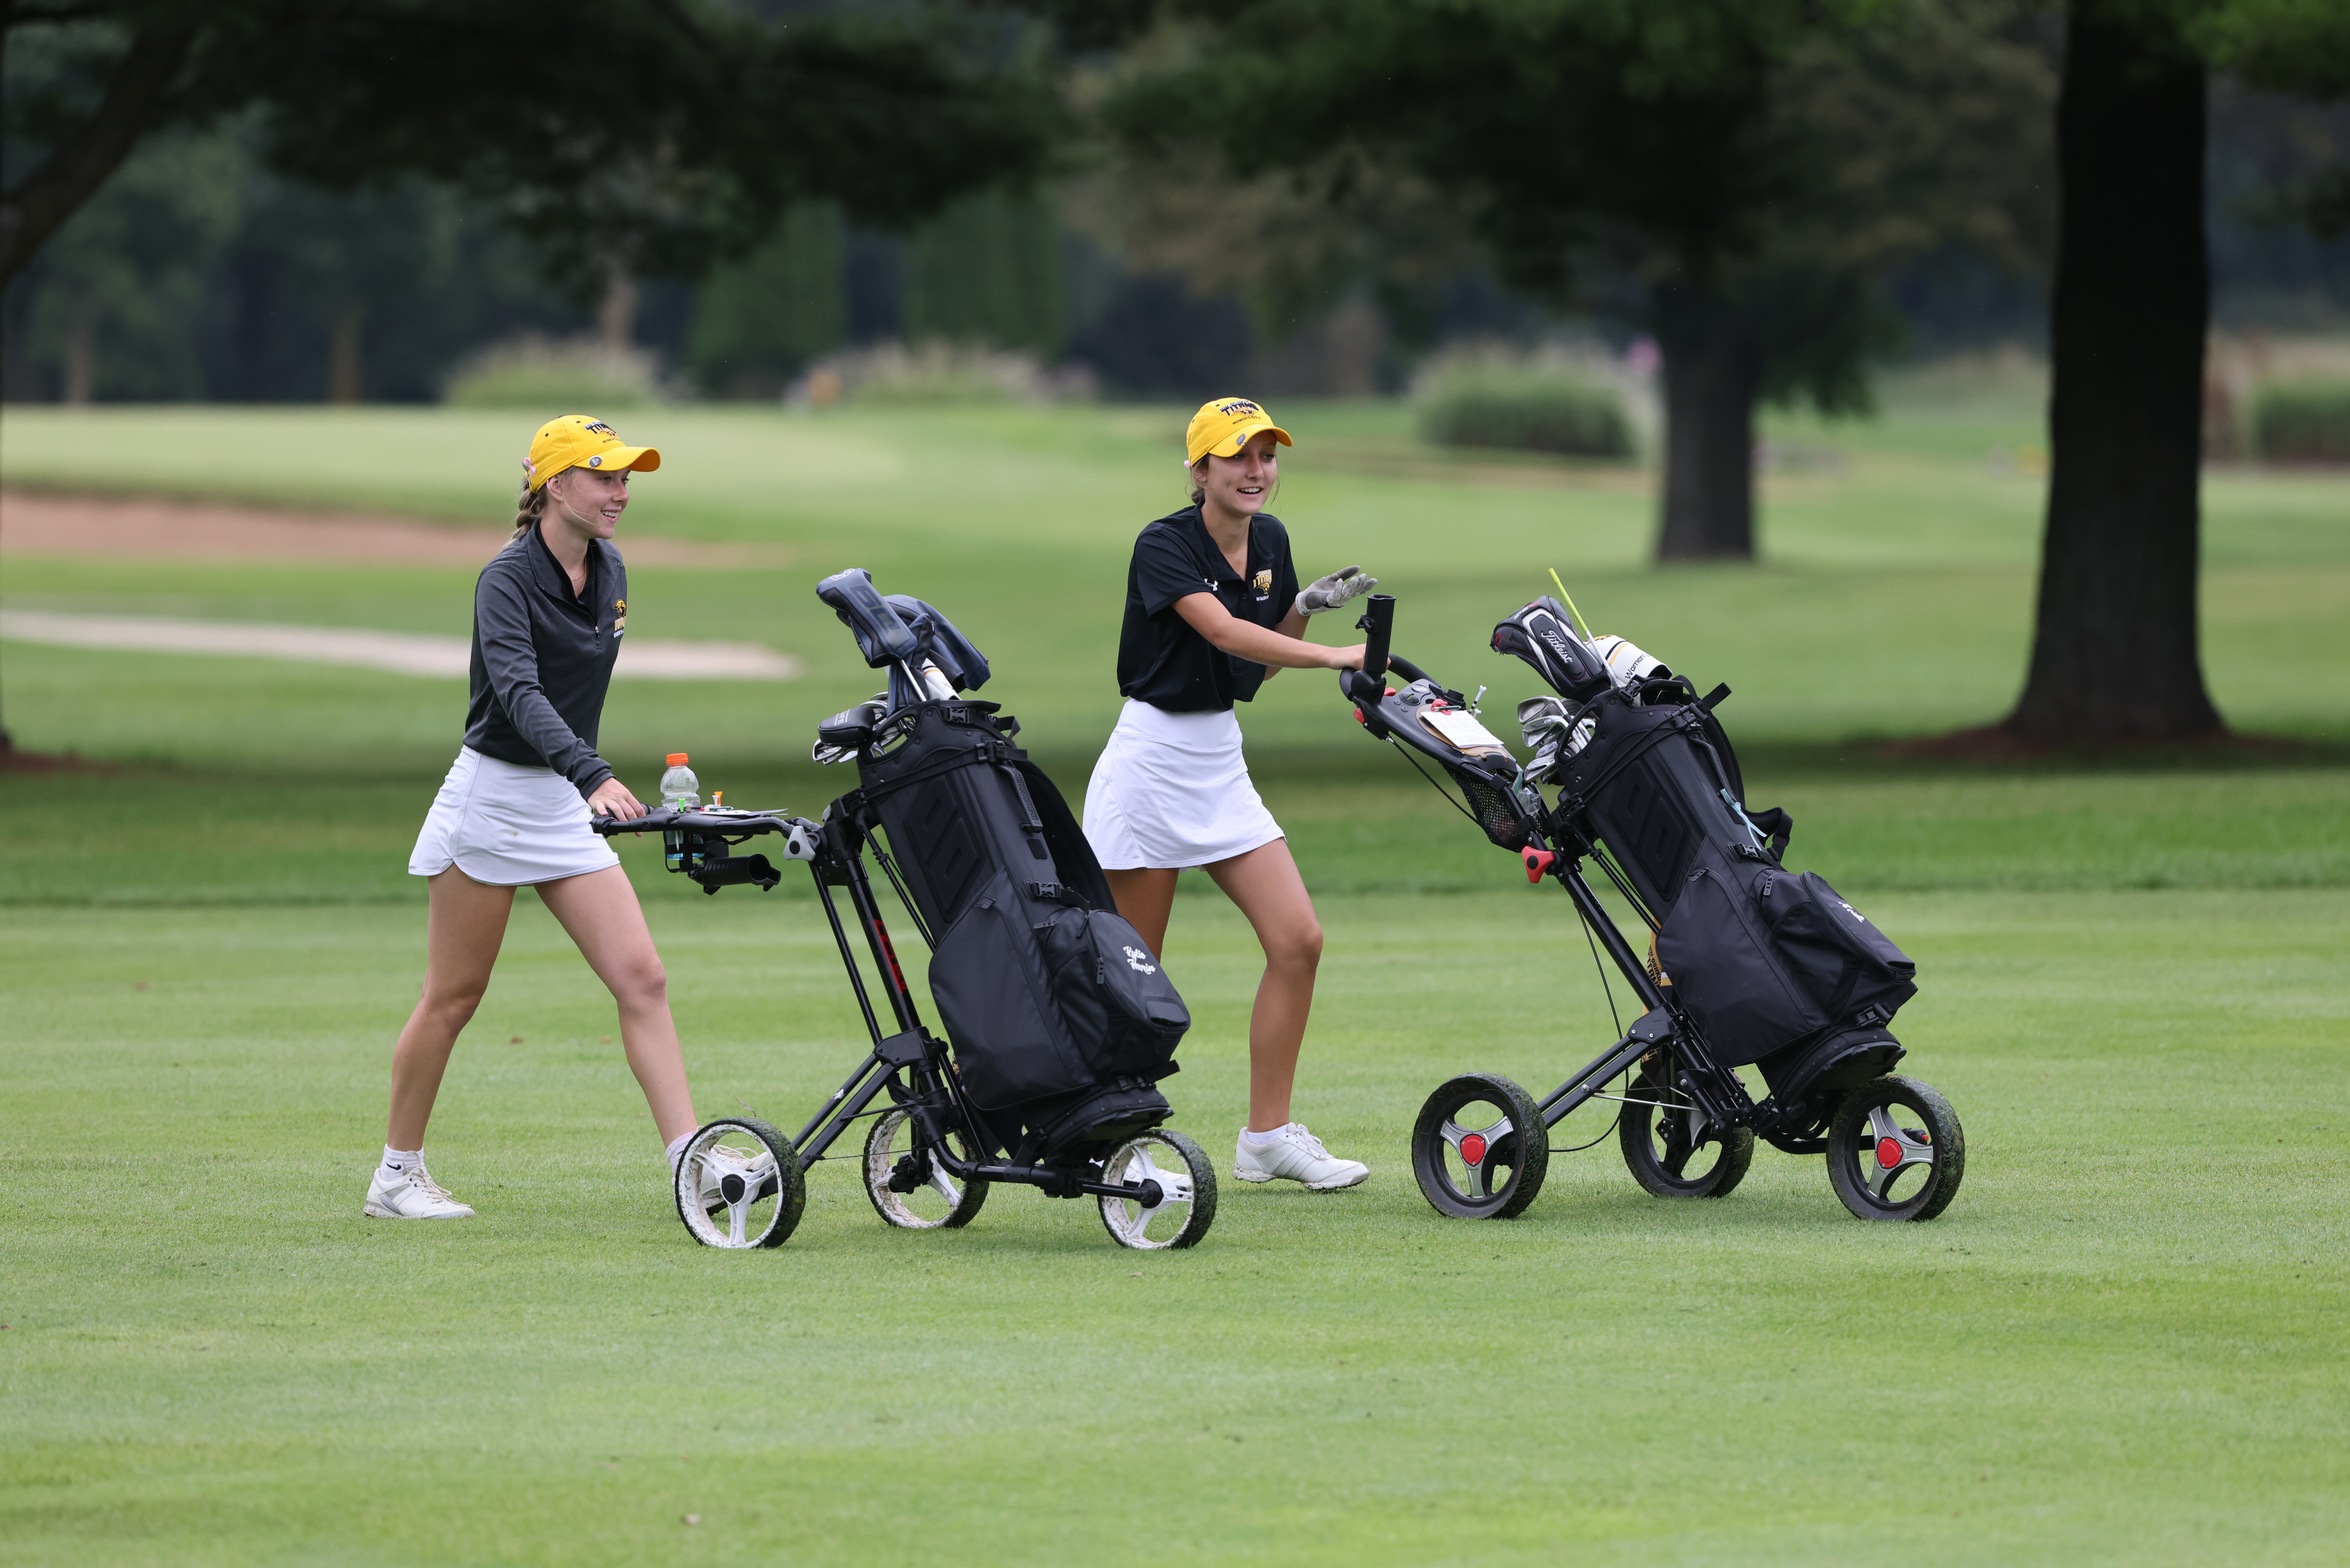 Golfers To Compete In Stevens Point This Weekend